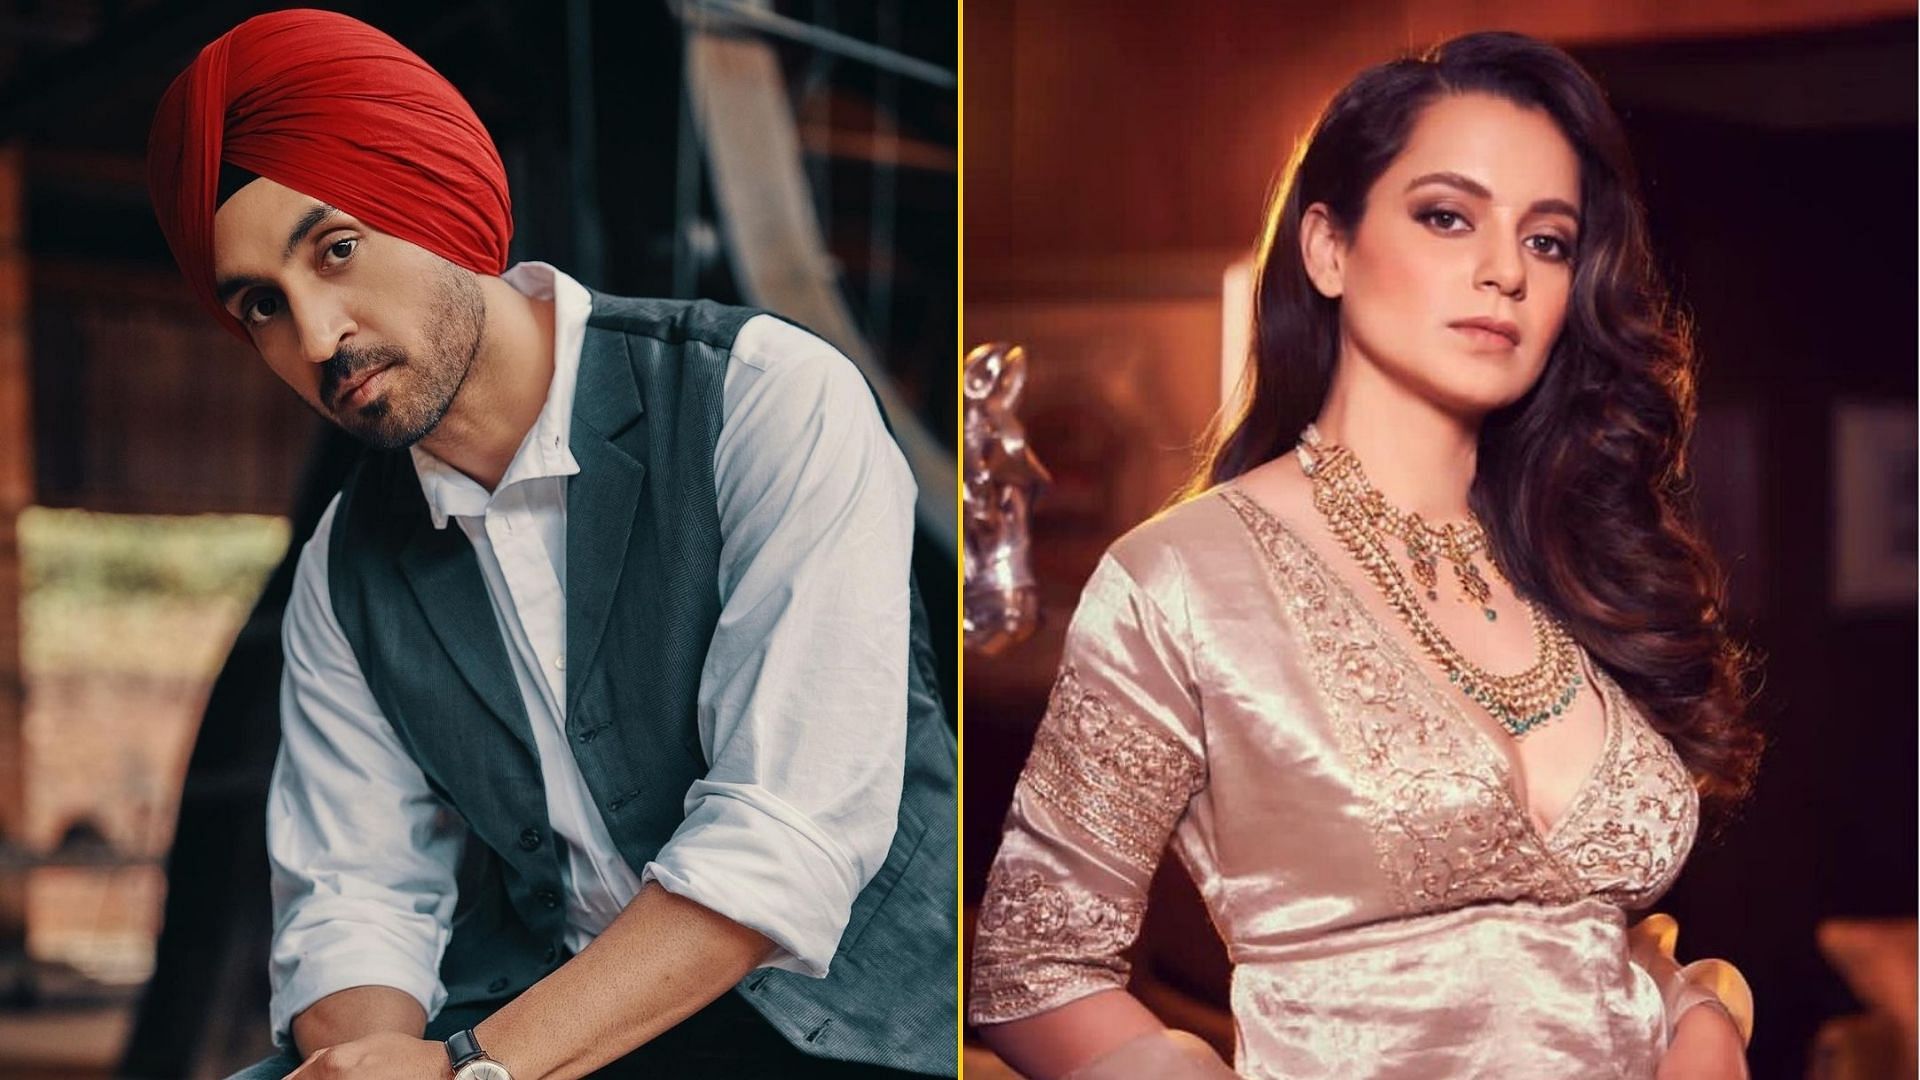 Diljit Dosanjh has criticised Kangana Ranaut for her false claims about the farmers' protests.